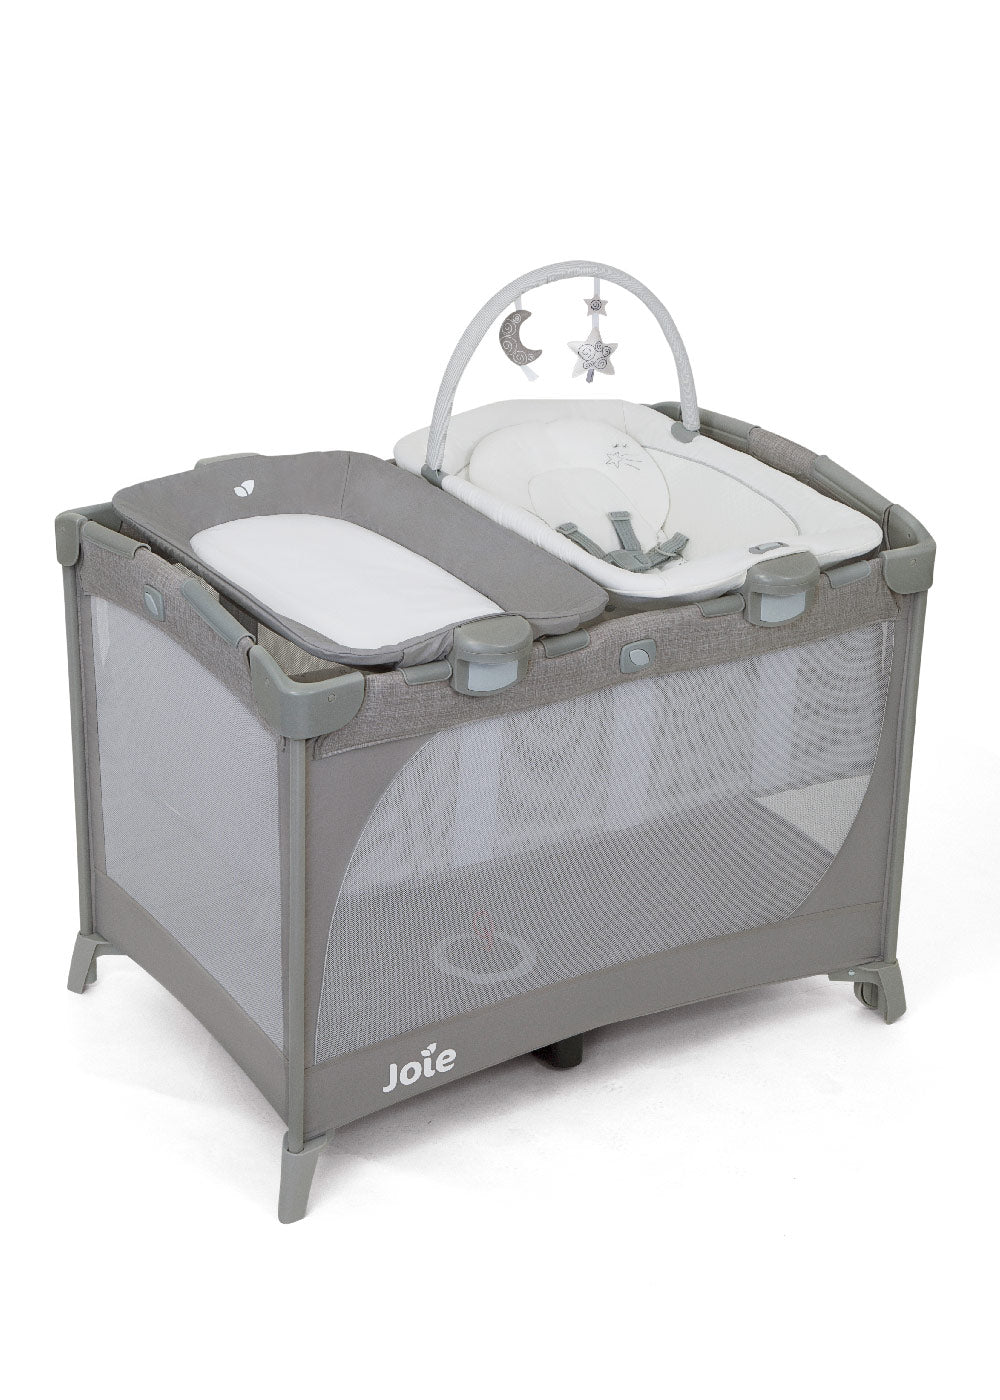 Joie Commuter Change™ Travel Cot - Speckled Grey – Mamas